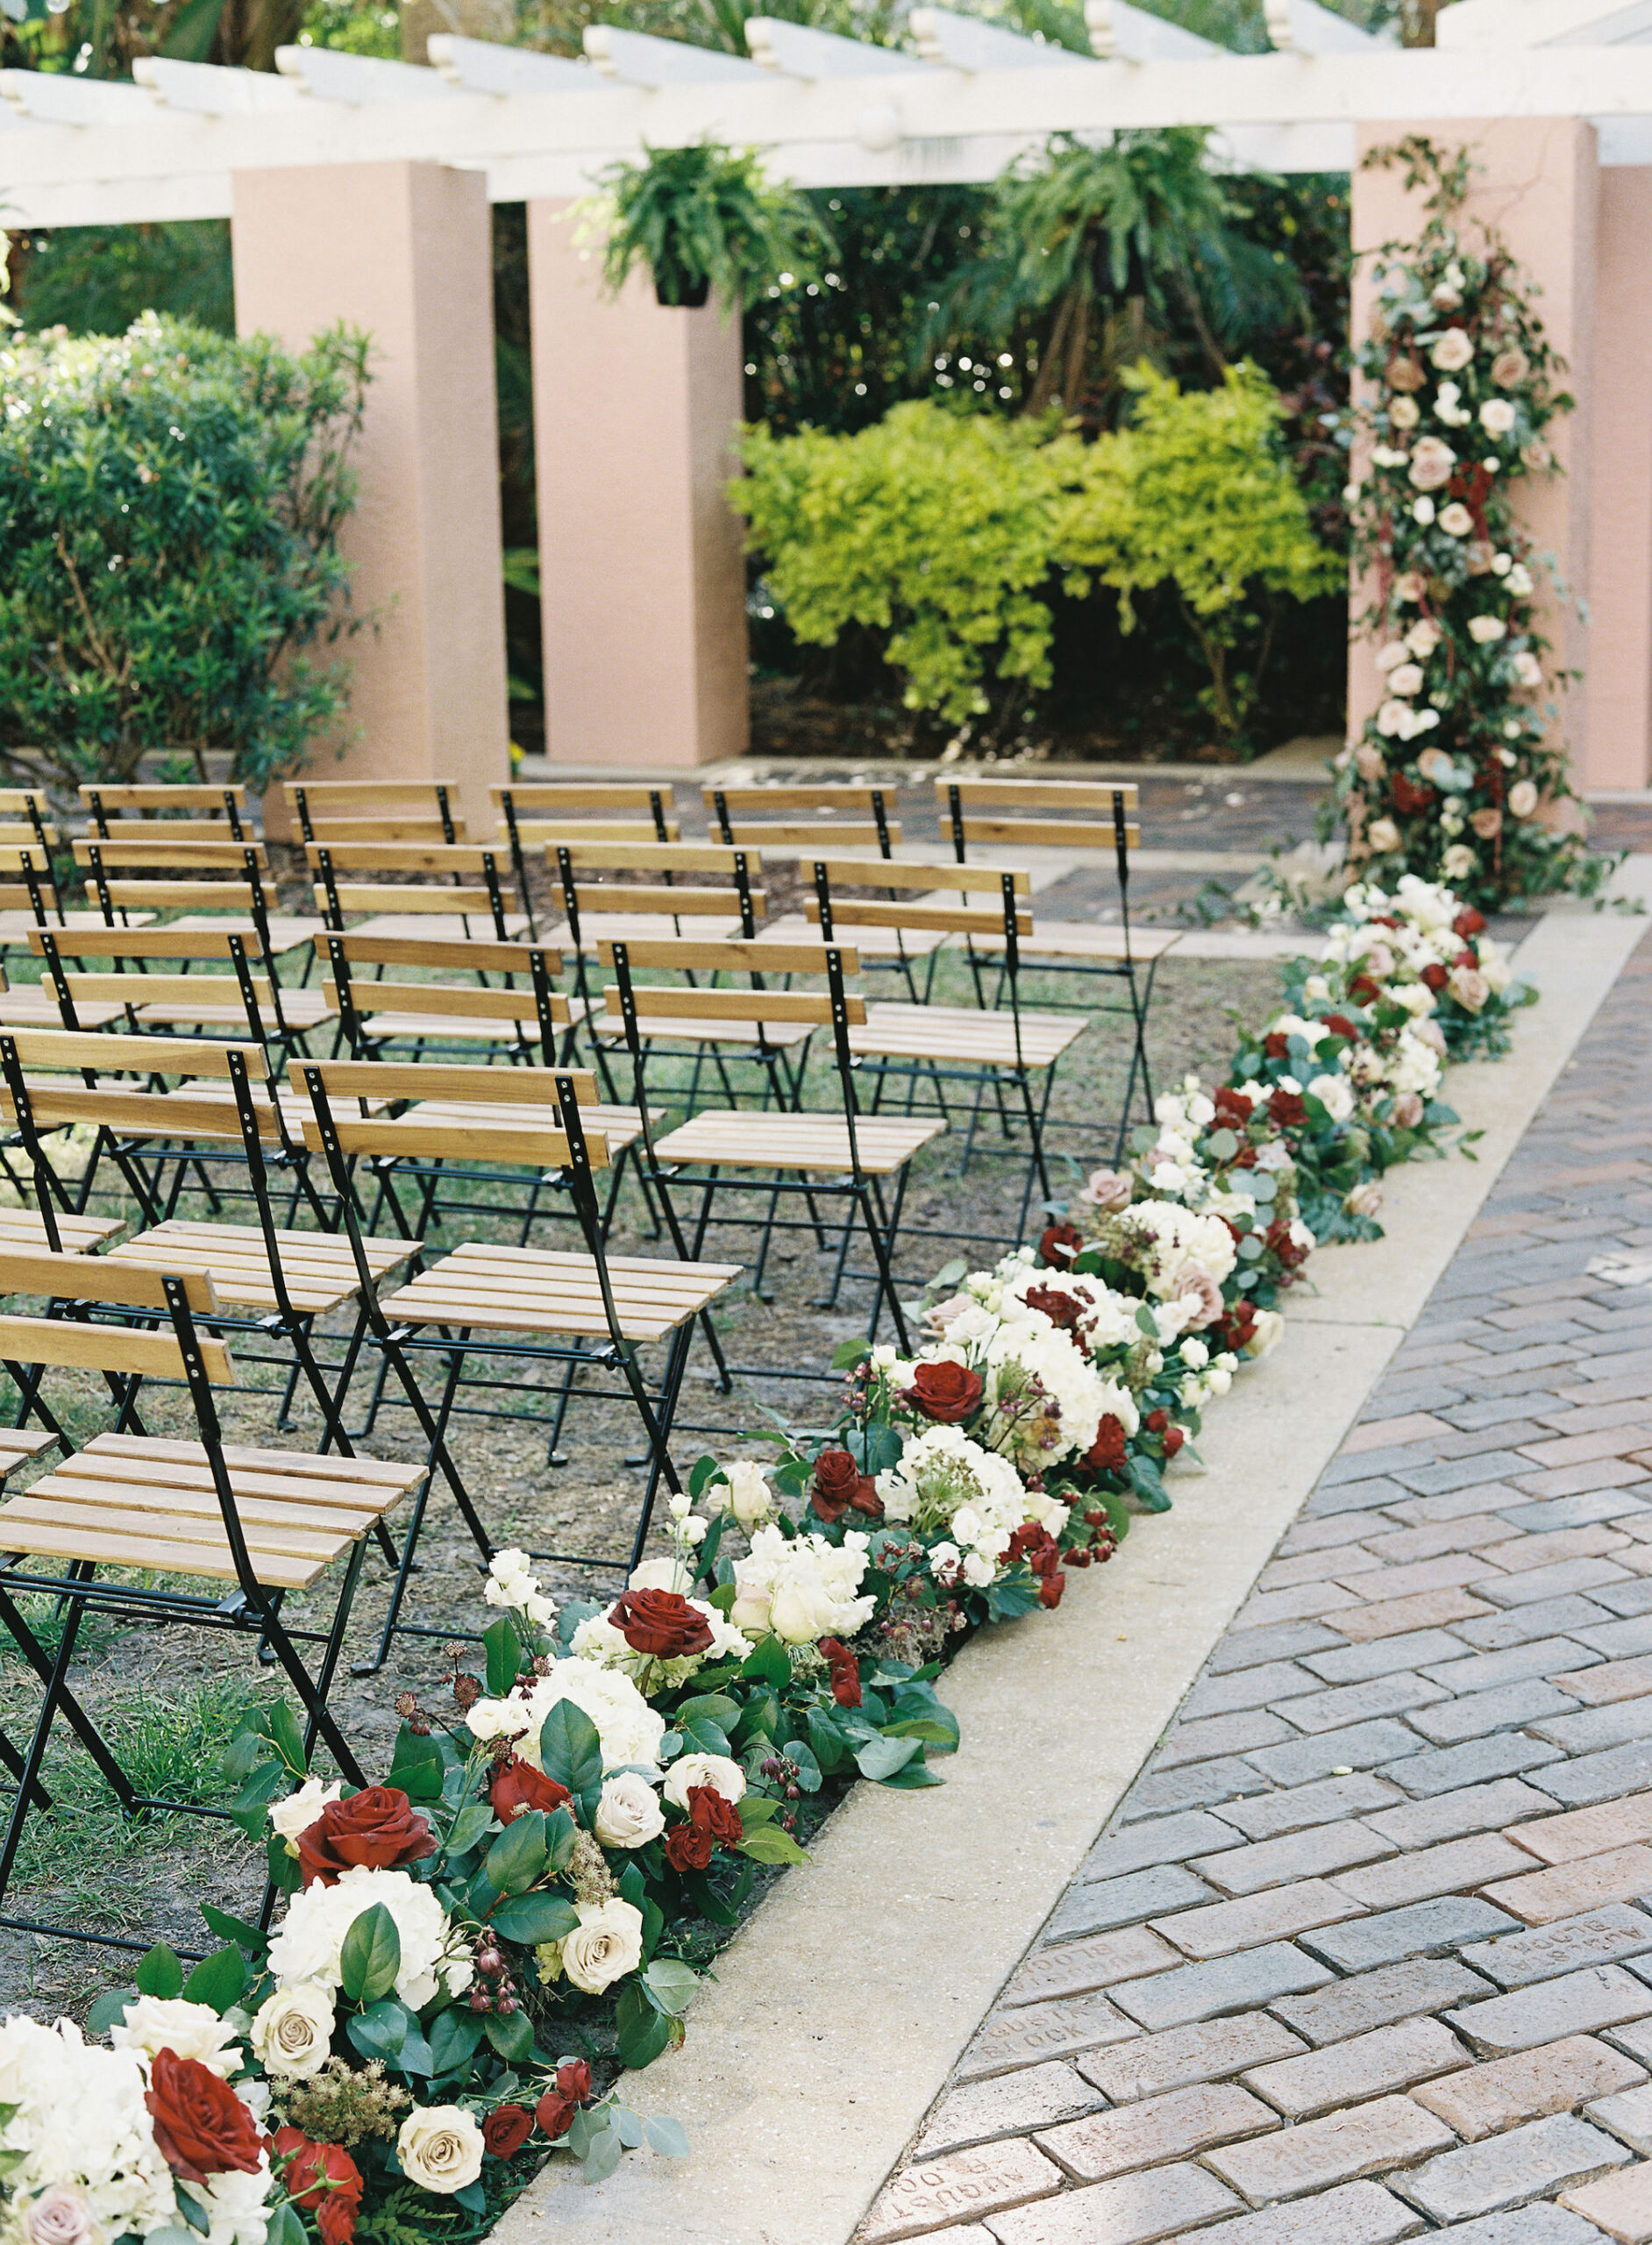 Royal Glam Gatsby Elegant Wedding Ceremony Decor, Wooden Garden Chairs, Greenery and White and Red Roses Flower Arrangements Lining Aisle | Tampa Bay Wedding Planner and Designer John Campbell Weddings